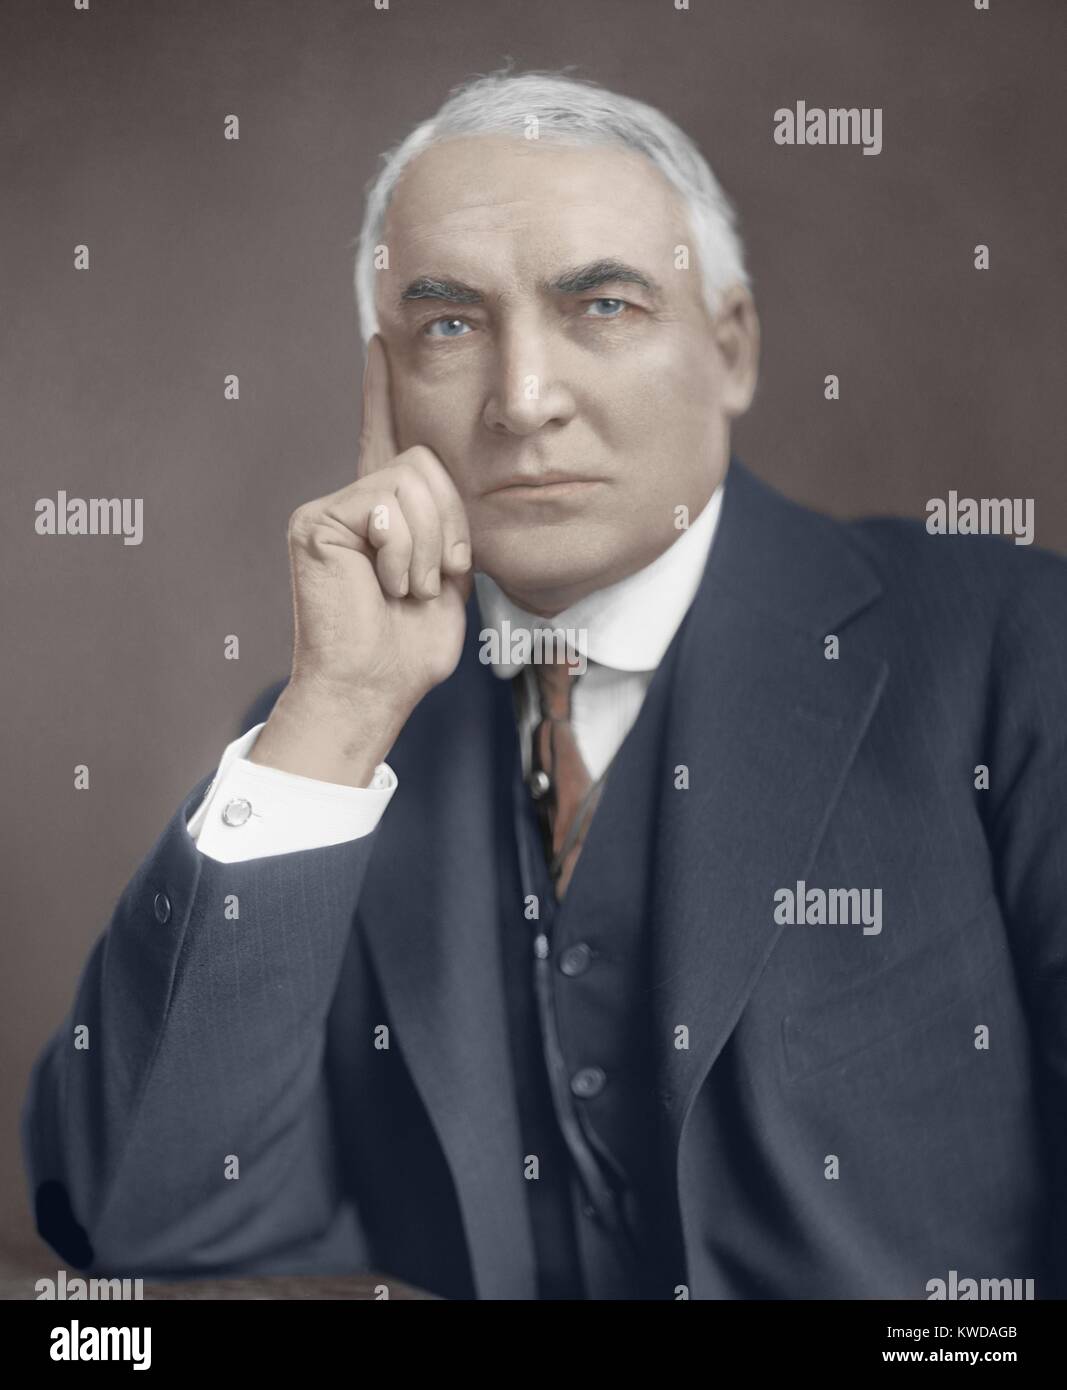 President Warren Harding, ca. 1921-23. He was President for less than two and half years when he died during a tour of Alaska and the Western states on August 2, 1923. Studio portrait with digital color (BSLOC_2016_9_11)DUPLICATE REMOVED: SHOULD HAVE BEEN "7 Continents History", AS PER Barbara Schultz - DD Stock Photo